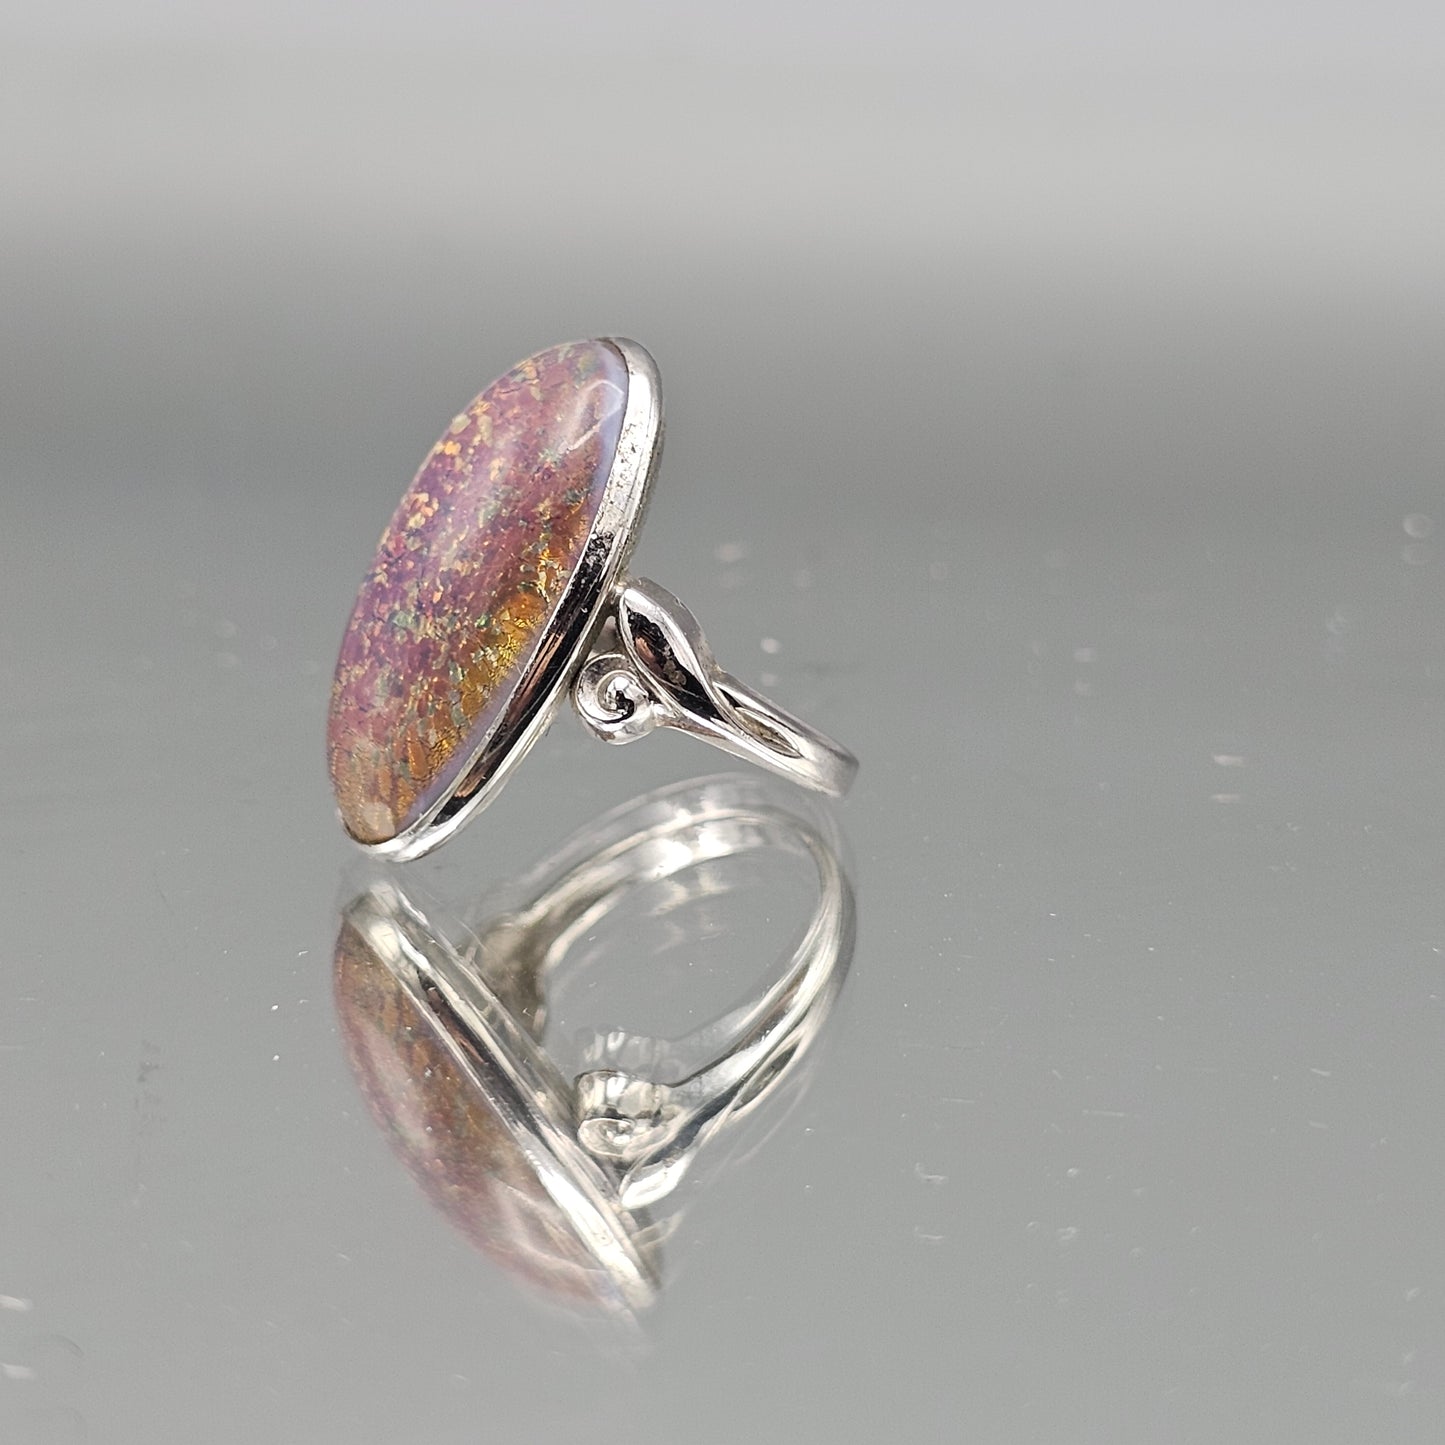 Vintage Sterling Silver Ring with Harlequin Glass / Fire Opal